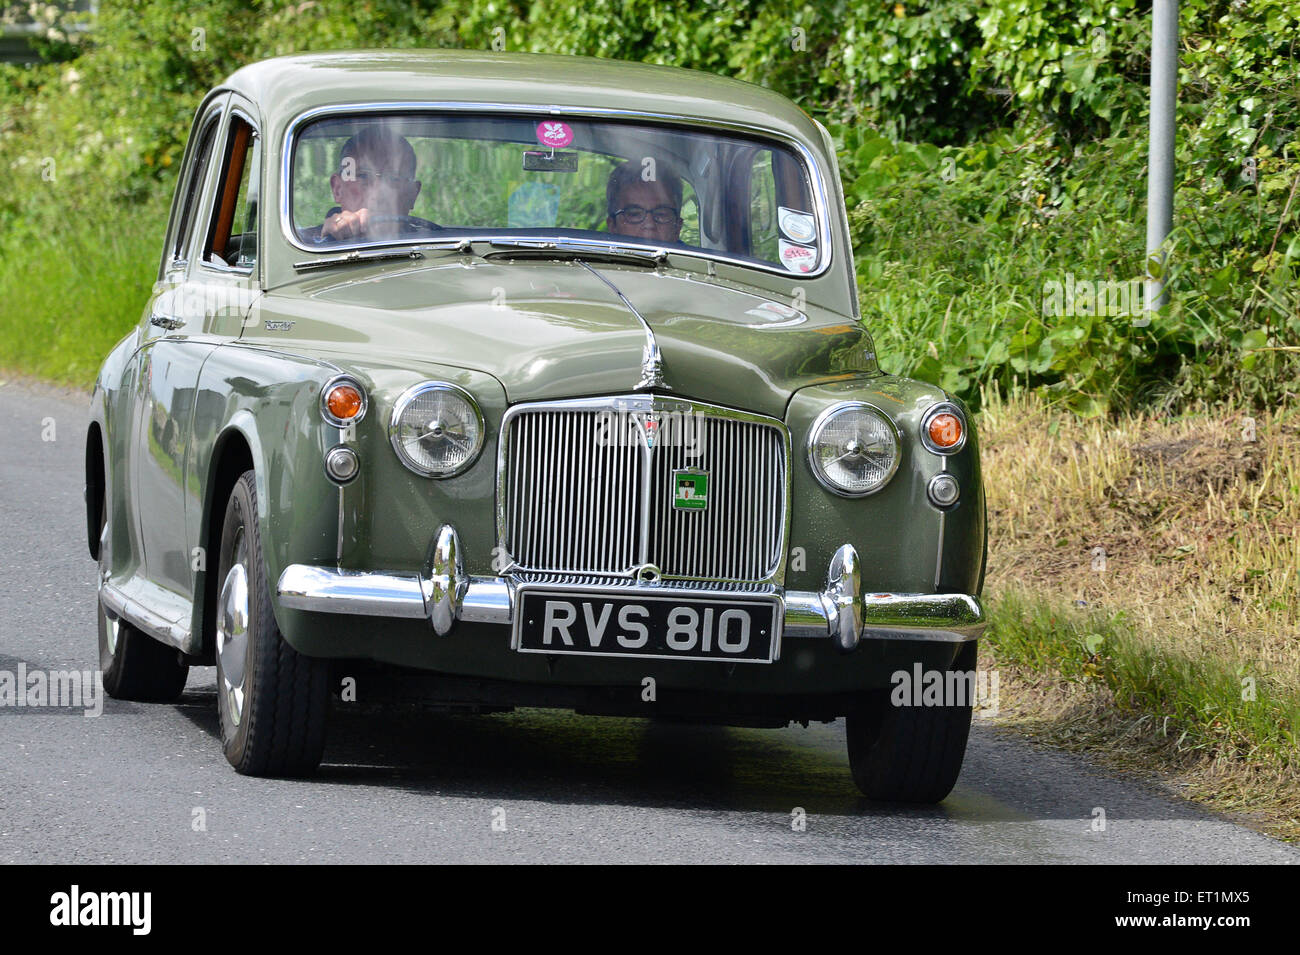 1960s Rover 100 classic saloon car on country road, Burnfoot, County Donegal, Ireland Stock Photo